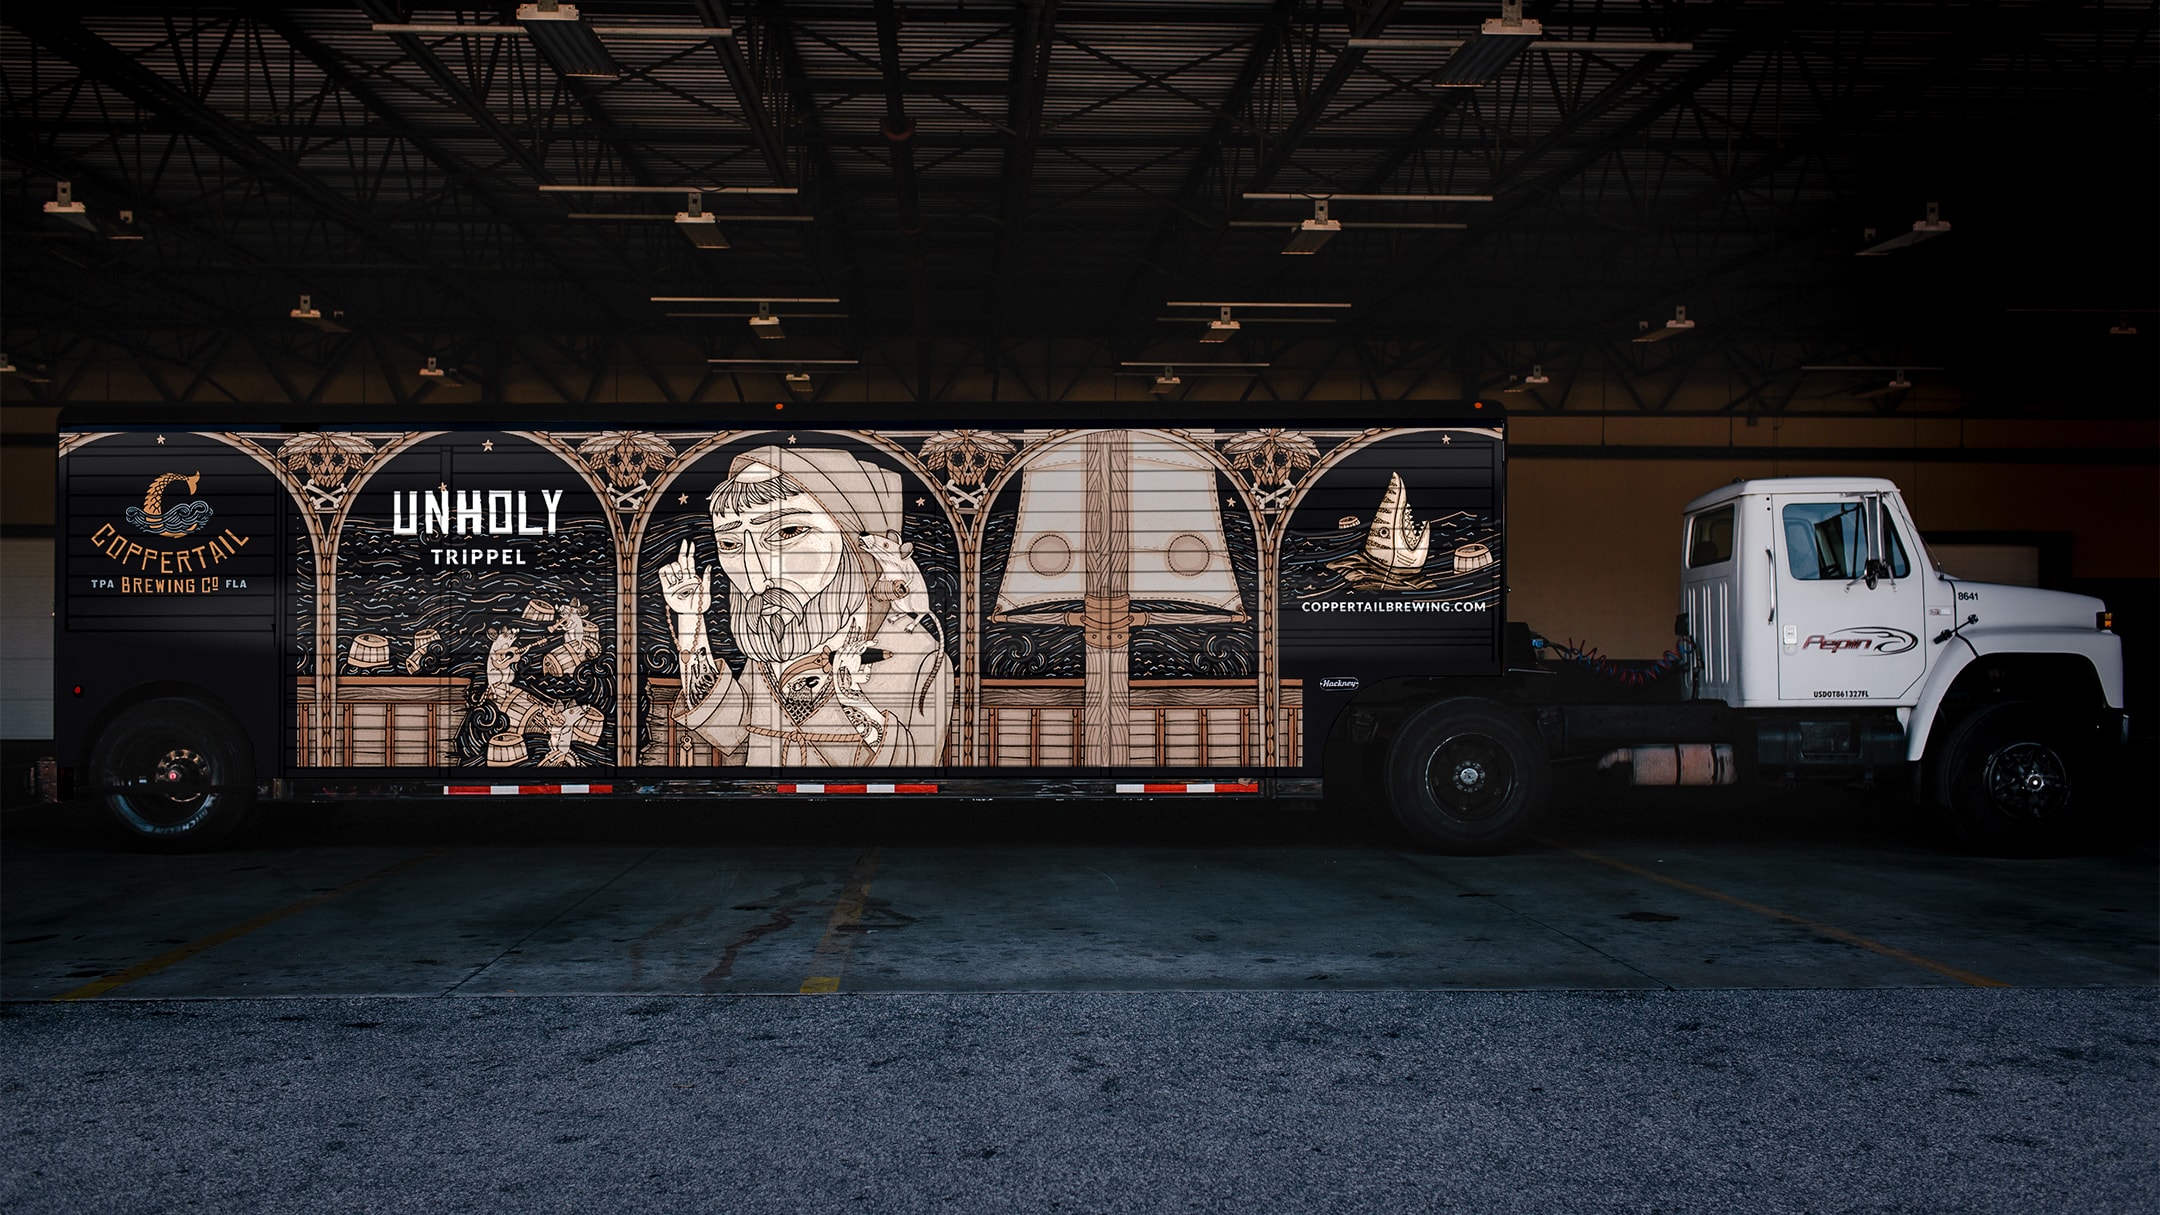 Coppertail brand wrapped truck